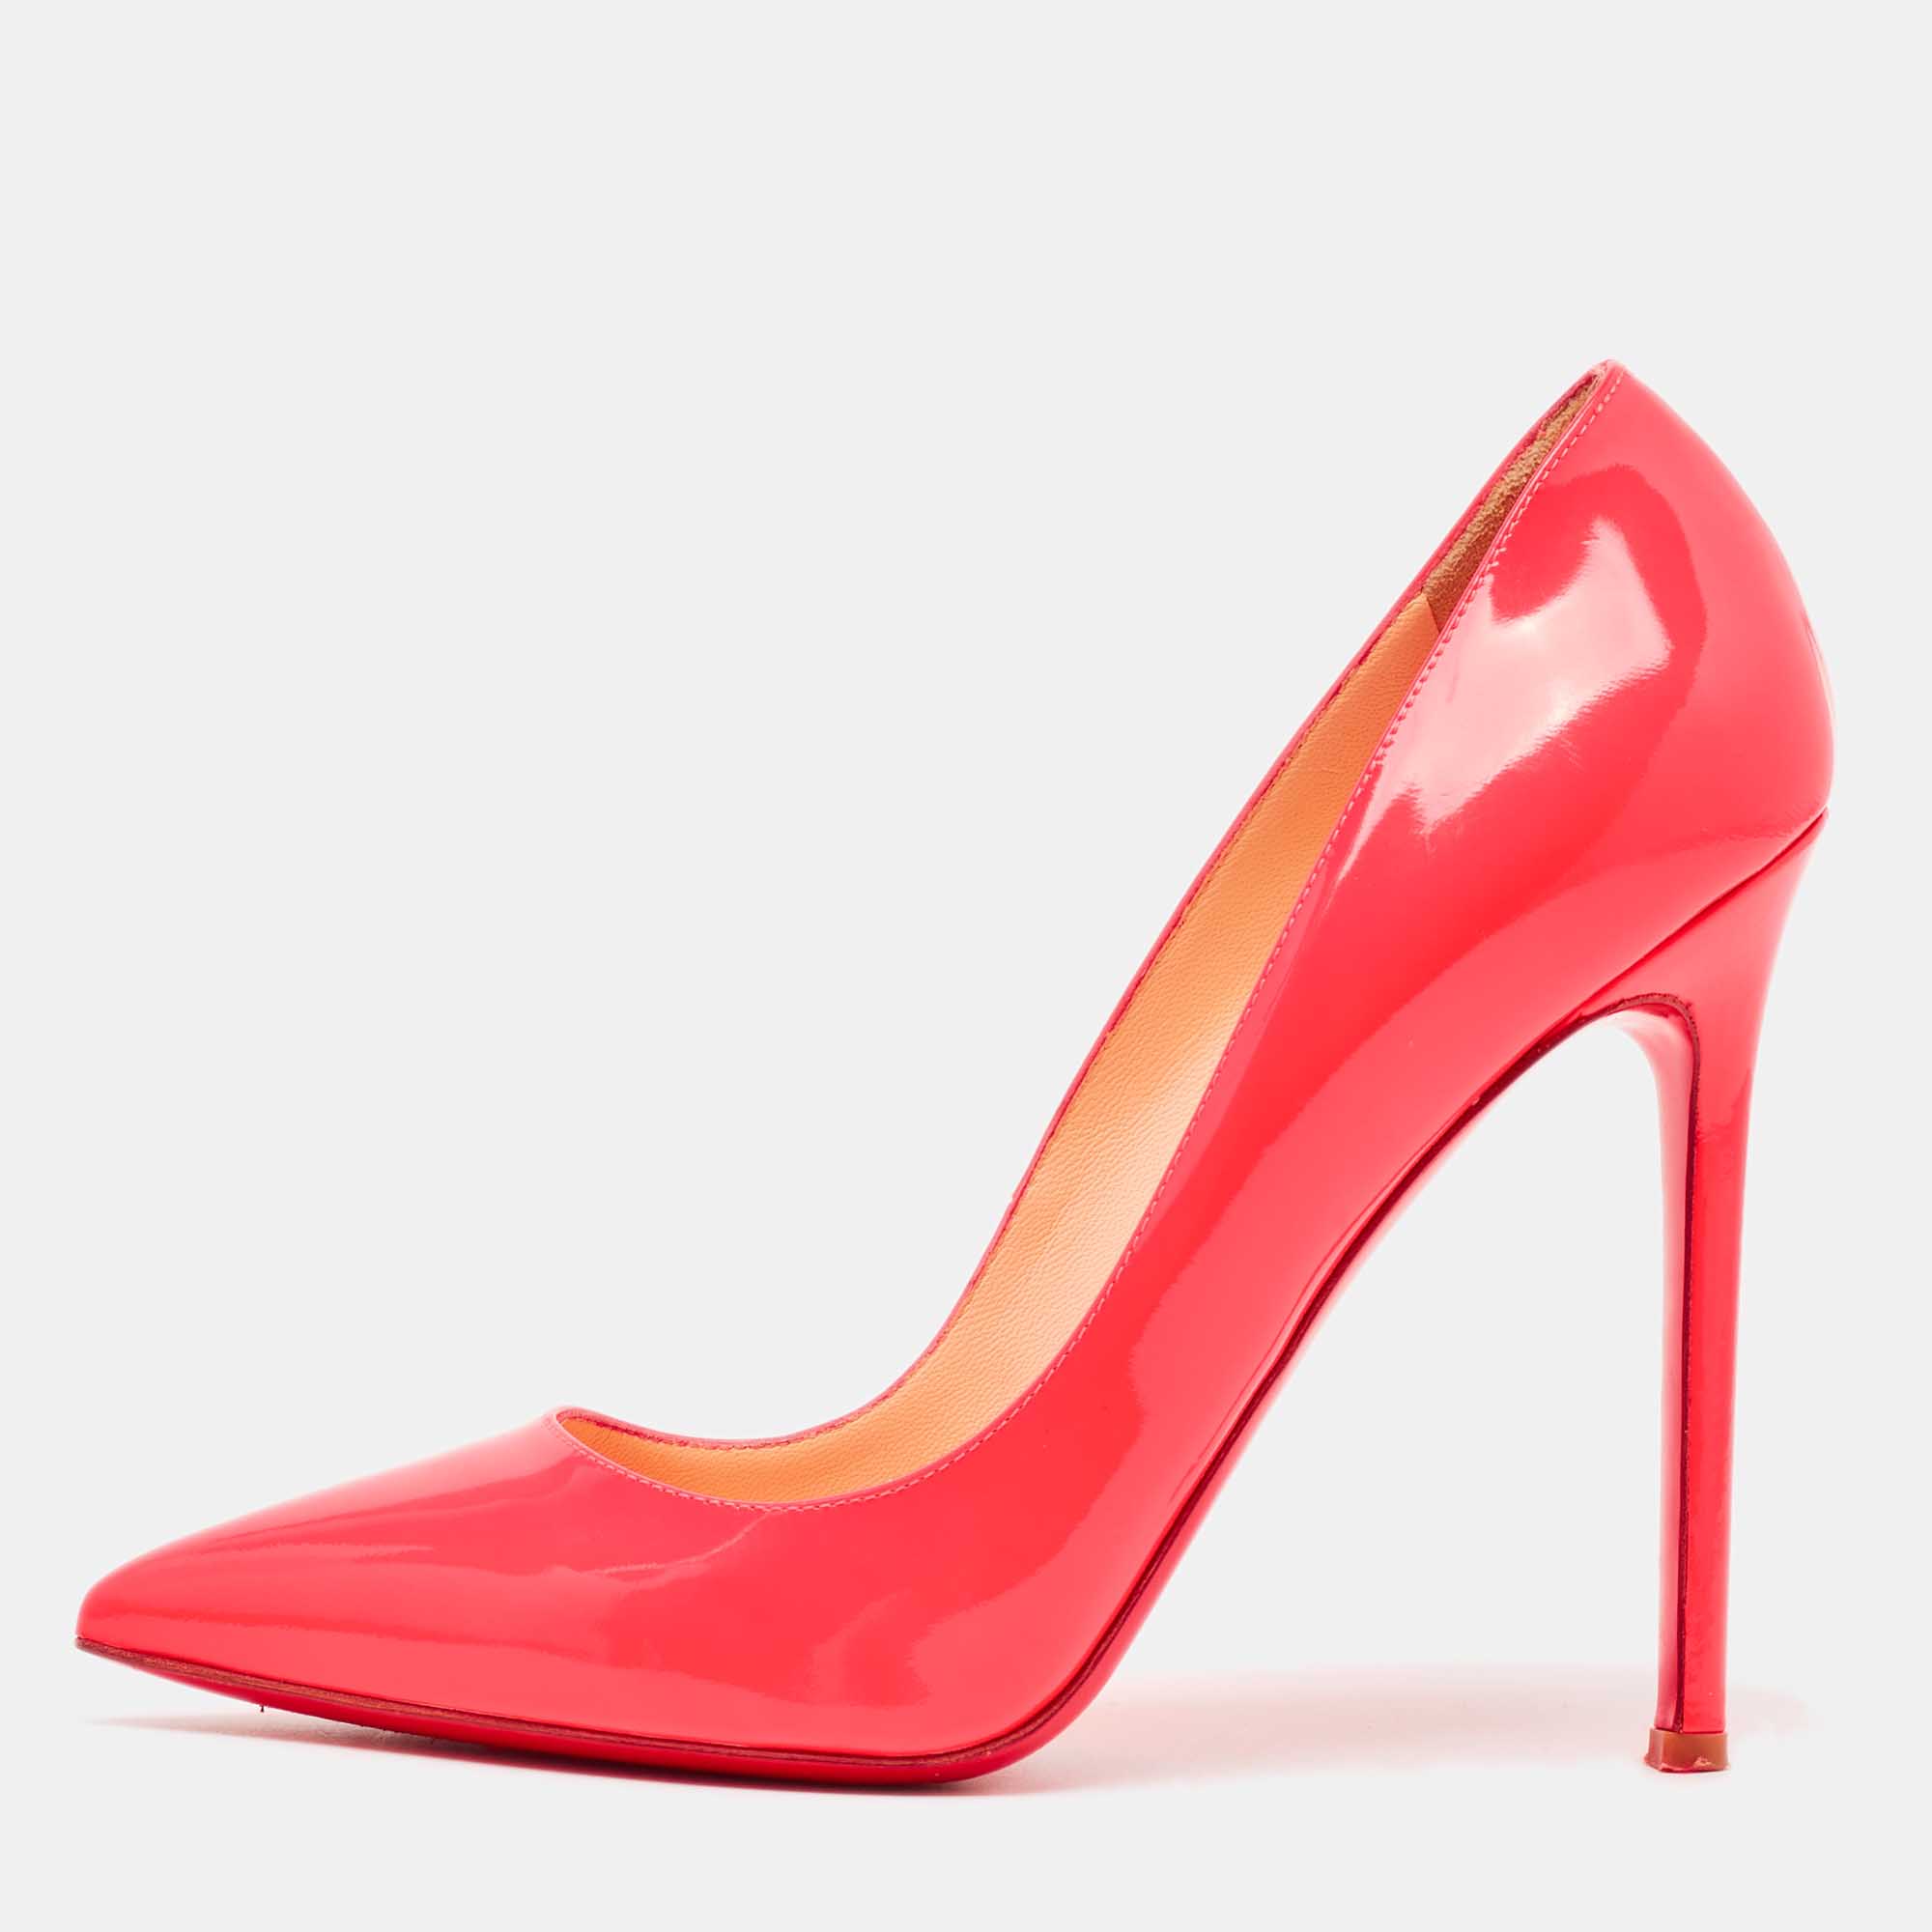 

Christian Louboutin Neon Pink Patent Leather Pigalle Follies Pumps Size